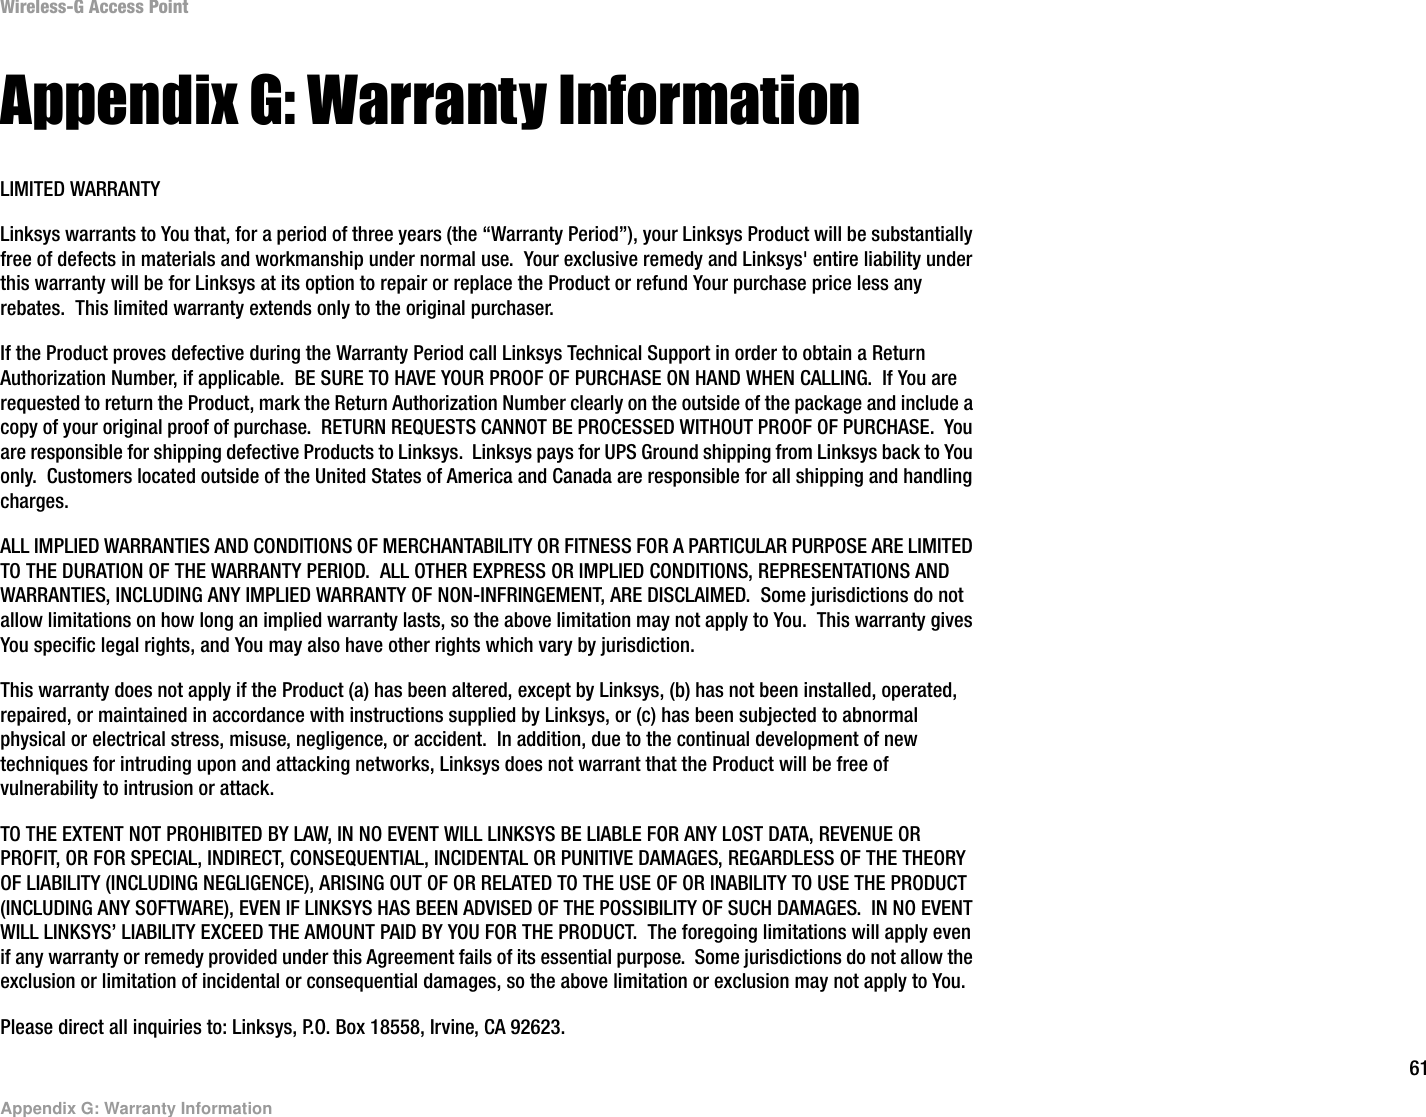 61Appendix G: Warranty InformationWireless-G Access PointAppendix G: Warranty InformationLIMITED WARRANTYLinksys warrants to You that, for a period of three years (the “Warranty Period”), your Linksys Product will be substantially free of defects in materials and workmanship under normal use.  Your exclusive remedy and Linksys&apos; entire liability under this warranty will be for Linksys at its option to repair or replace the Product or refund Your purchase price less any rebates.  This limited warranty extends only to the original purchaser.  If the Product proves defective during the Warranty Period call Linksys Technical Support in order to obtain a Return Authorization Number, if applicable.  BE SURE TO HAVE YOUR PROOF OF PURCHASE ON HAND WHEN CALLING.  If You are requested to return the Product, mark the Return Authorization Number clearly on the outside of the package and include a copy of your original proof of purchase.  RETURN REQUESTS CANNOT BE PROCESSED WITHOUT PROOF OF PURCHASE.  You are responsible for shipping defective Products to Linksys.  Linksys pays for UPS Ground shipping from Linksys back to You only.  Customers located outside of the United States of America and Canada are responsible for all shipping and handling charges. ALL IMPLIED WARRANTIES AND CONDITIONS OF MERCHANTABILITY OR FITNESS FOR A PARTICULAR PURPOSE ARE LIMITED TO THE DURATION OF THE WARRANTY PERIOD.  ALL OTHER EXPRESS OR IMPLIED CONDITIONS, REPRESENTATIONS AND WARRANTIES, INCLUDING ANY IMPLIED WARRANTY OF NON-INFRINGEMENT, ARE DISCLAIMED.  Some jurisdictions do not allow limitations on how long an implied warranty lasts, so the above limitation may not apply to You.  This warranty gives You specific legal rights, and You may also have other rights which vary by jurisdiction.This warranty does not apply if the Product (a) has been altered, except by Linksys, (b) has not been installed, operated, repaired, or maintained in accordance with instructions supplied by Linksys, or (c) has been subjected to abnormal physical or electrical stress, misuse, negligence, or accident.  In addition, due to the continual development of new techniques for intruding upon and attacking networks, Linksys does not warrant that the Product will be free of vulnerability to intrusion or attack.TO THE EXTENT NOT PROHIBITED BY LAW, IN NO EVENT WILL LINKSYS BE LIABLE FOR ANY LOST DATA, REVENUE OR PROFIT, OR FOR SPECIAL, INDIRECT, CONSEQUENTIAL, INCIDENTAL OR PUNITIVE DAMAGES, REGARDLESS OF THE THEORY OF LIABILITY (INCLUDING NEGLIGENCE), ARISING OUT OF OR RELATED TO THE USE OF OR INABILITY TO USE THE PRODUCT (INCLUDING ANY SOFTWARE), EVEN IF LINKSYS HAS BEEN ADVISED OF THE POSSIBILITY OF SUCH DAMAGES.  IN NO EVENT WILL LINKSYS’ LIABILITY EXCEED THE AMOUNT PAID BY YOU FOR THE PRODUCT.  The foregoing limitations will apply even if any warranty or remedy provided under this Agreement fails of its essential purpose.  Some jurisdictions do not allow the exclusion or limitation of incidental or consequential damages, so the above limitation or exclusion may not apply to You.Please direct all inquiries to: Linksys, P.O. Box 18558, Irvine, CA 92623.